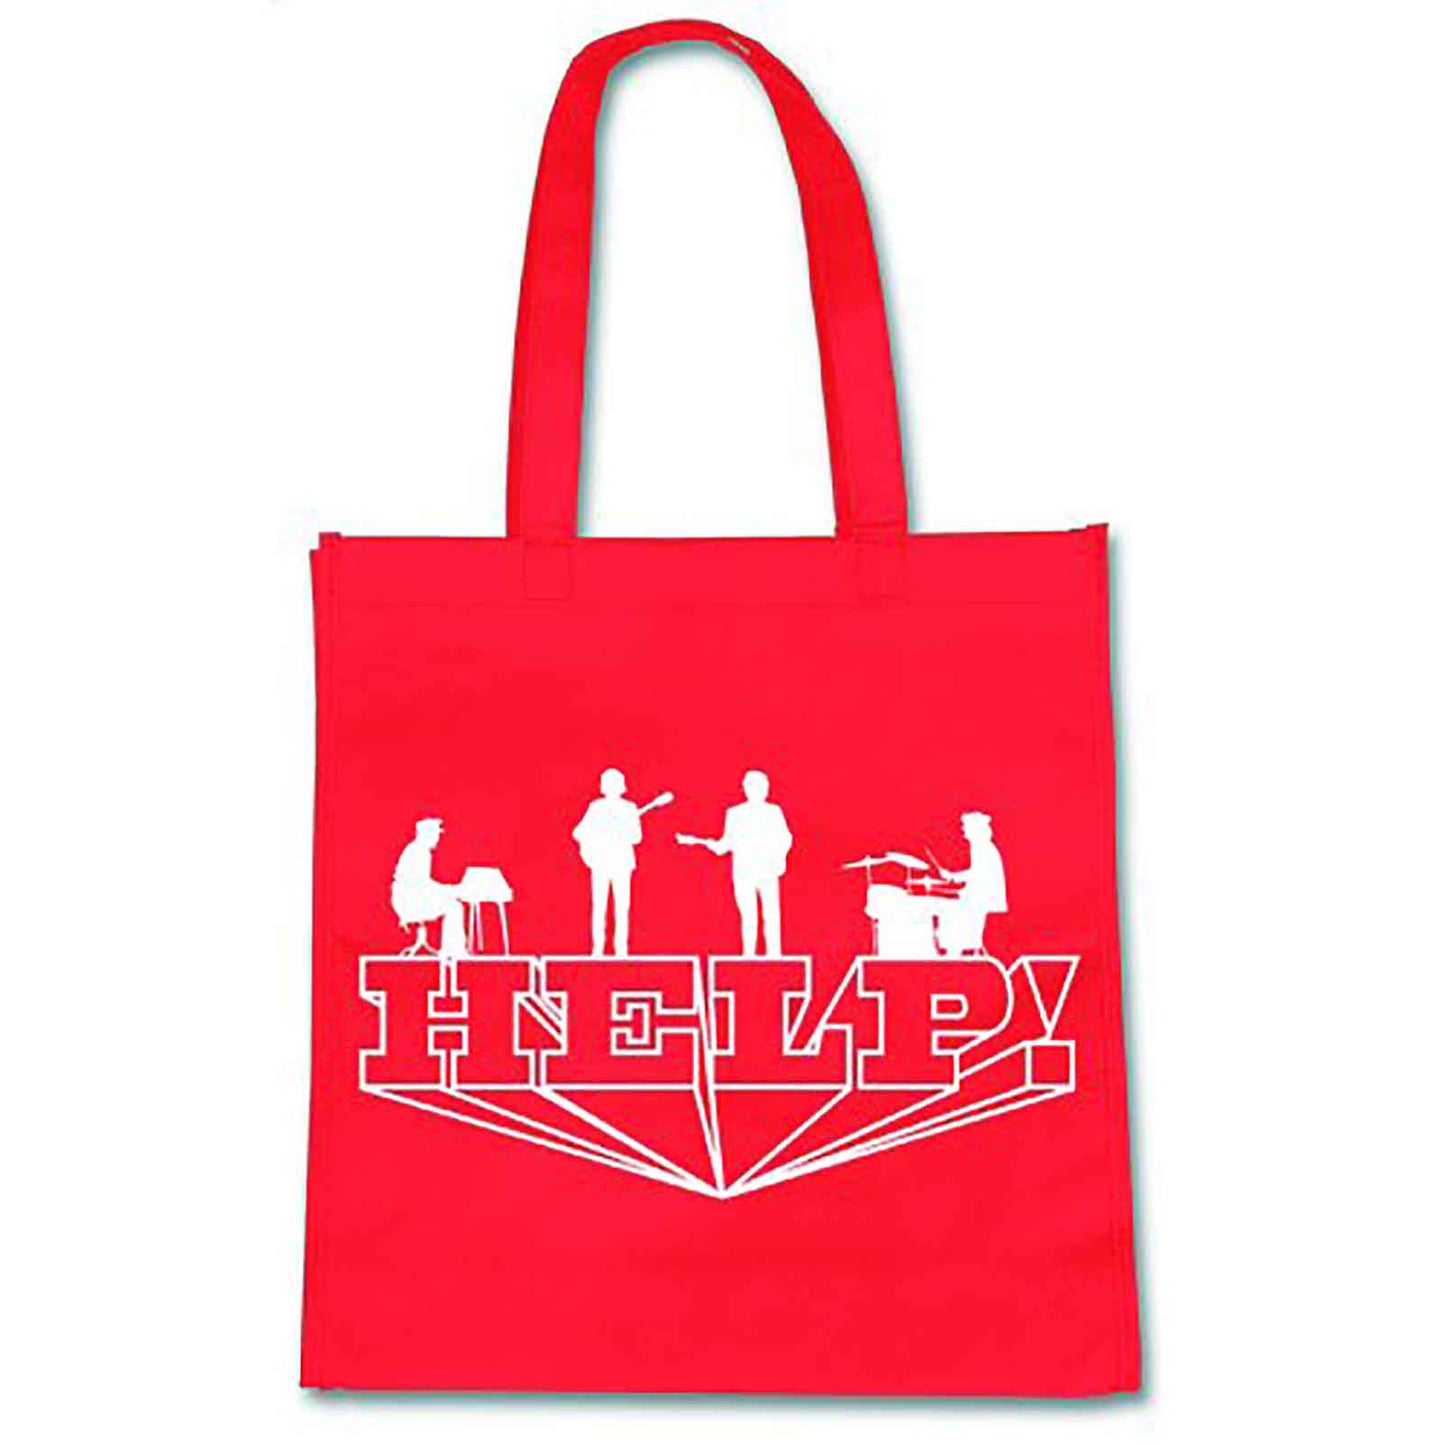 The Beatles Tote Bag Eco Shopper Bag Help Band Logo new Official Red